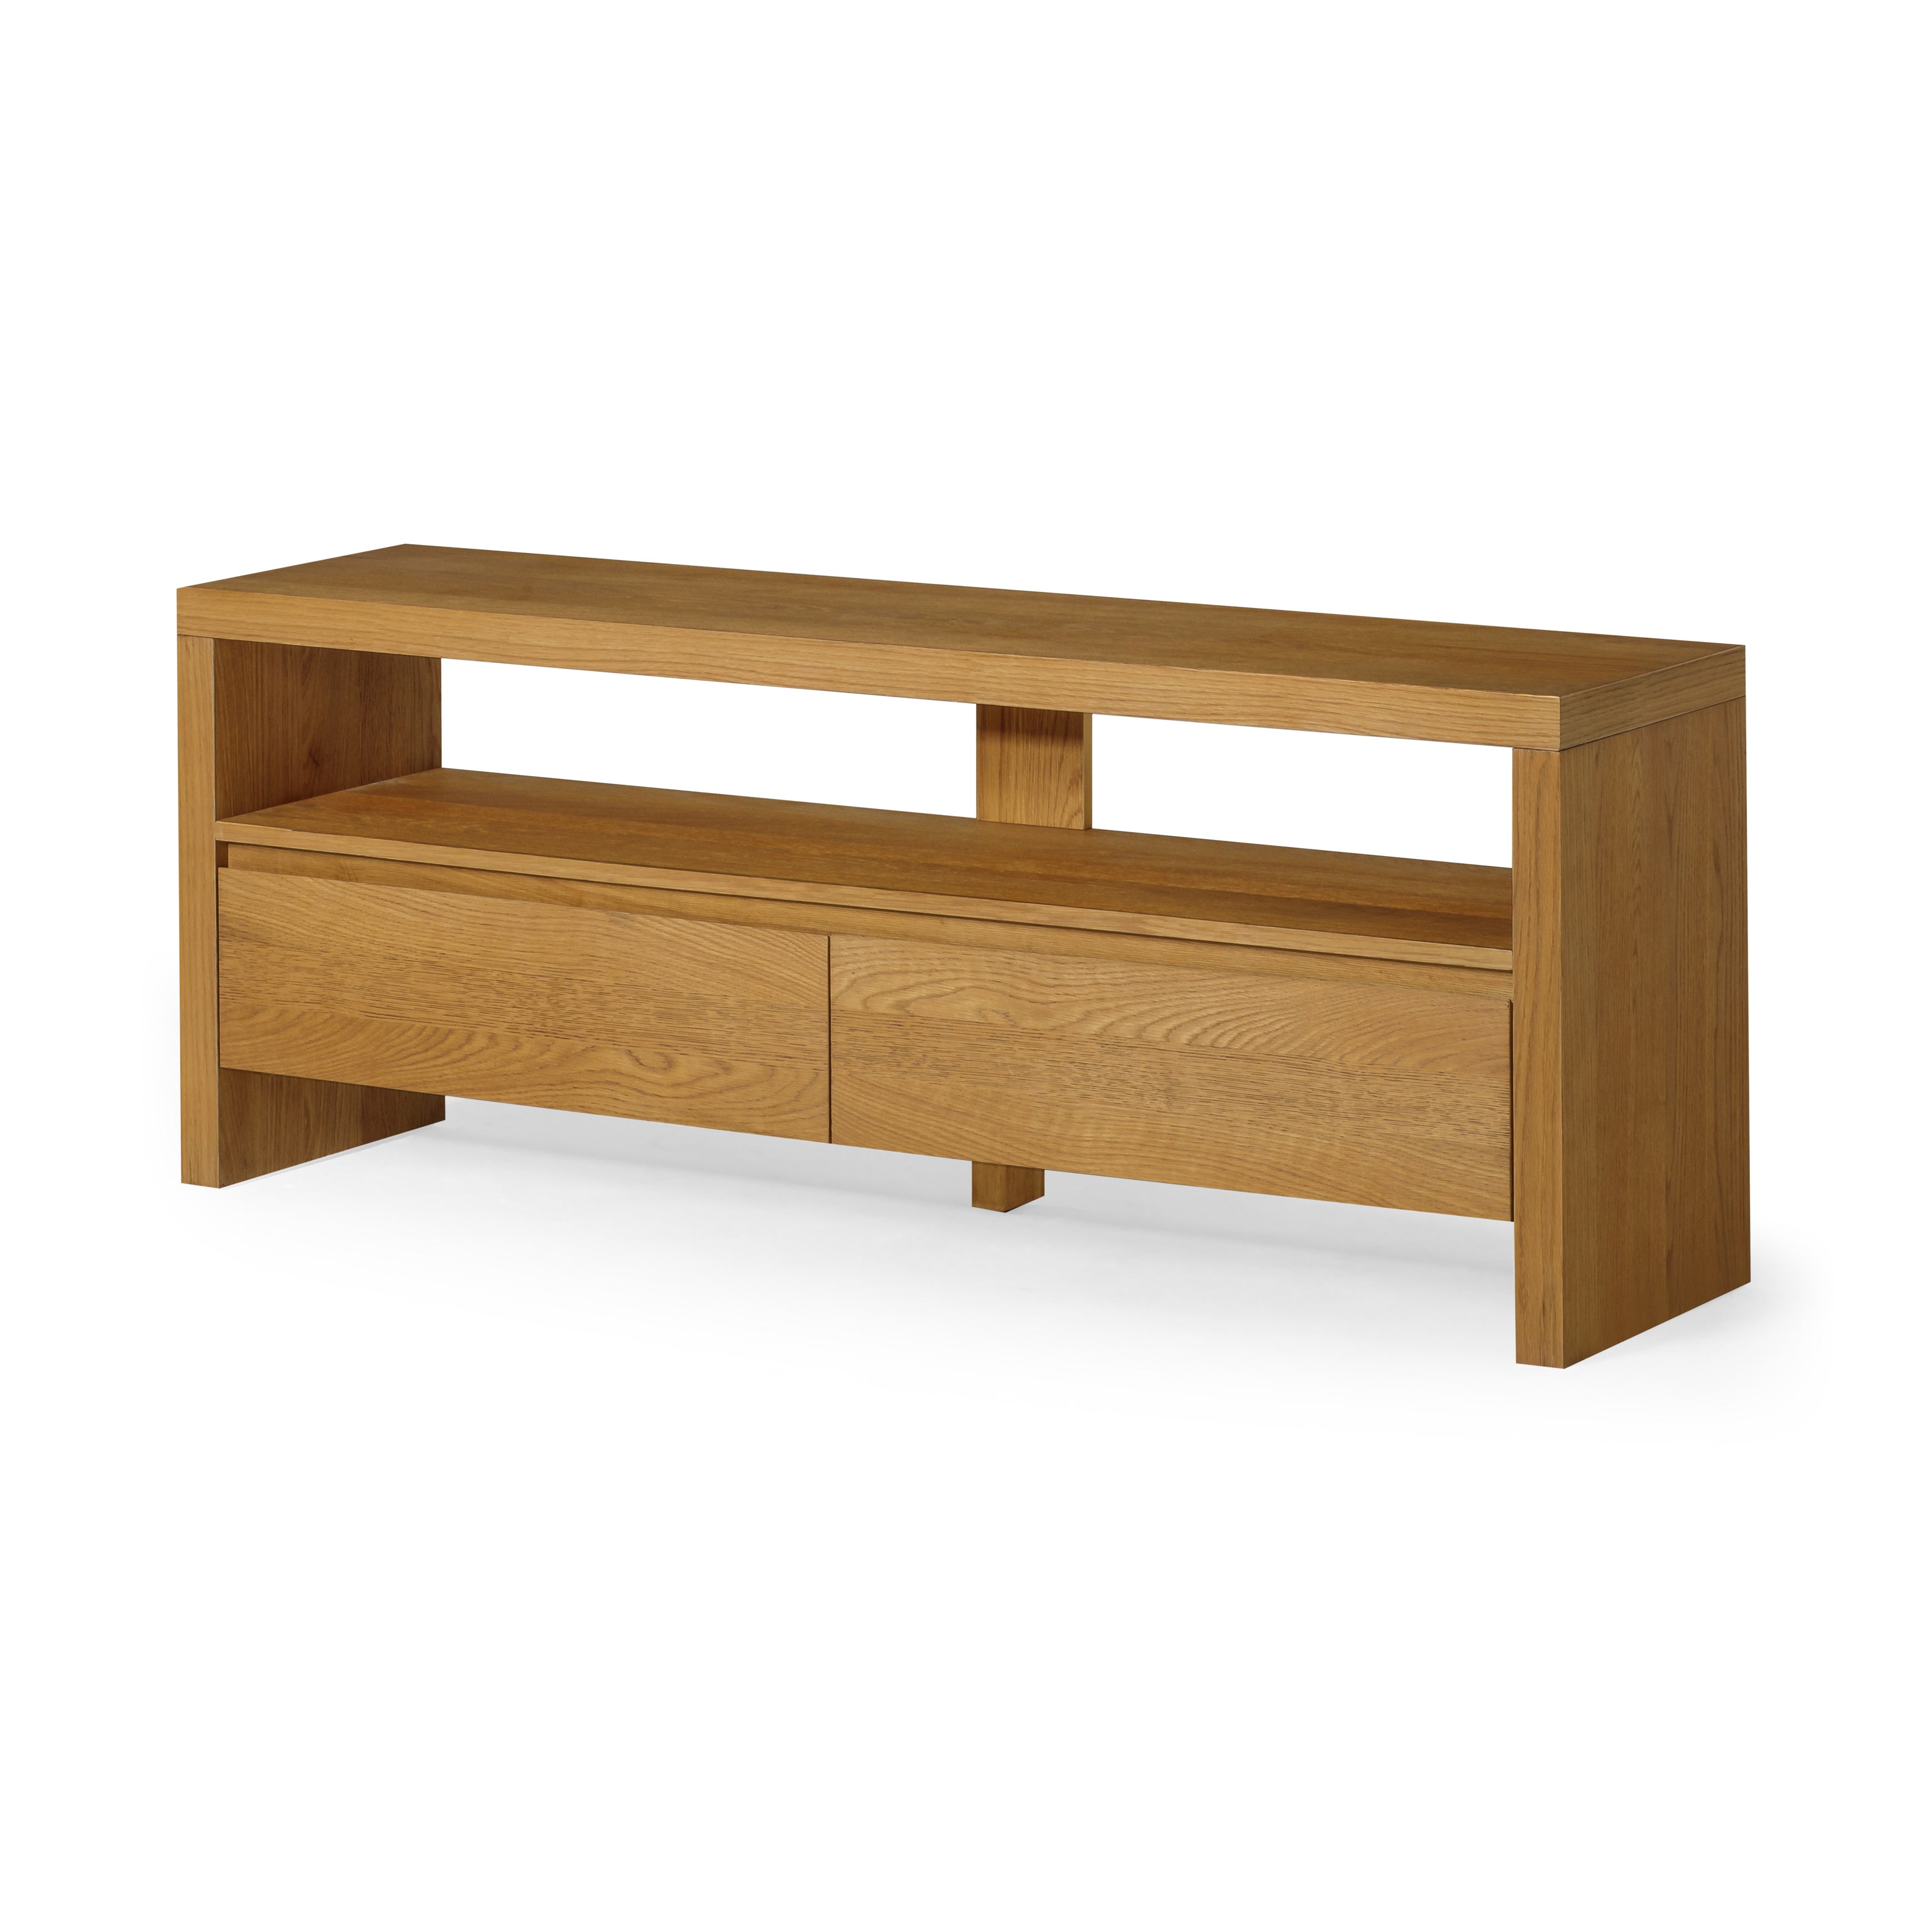 Ada Contemporary Wooden Media Unit in Refined Natural Finish in Media Units by Maven Lane